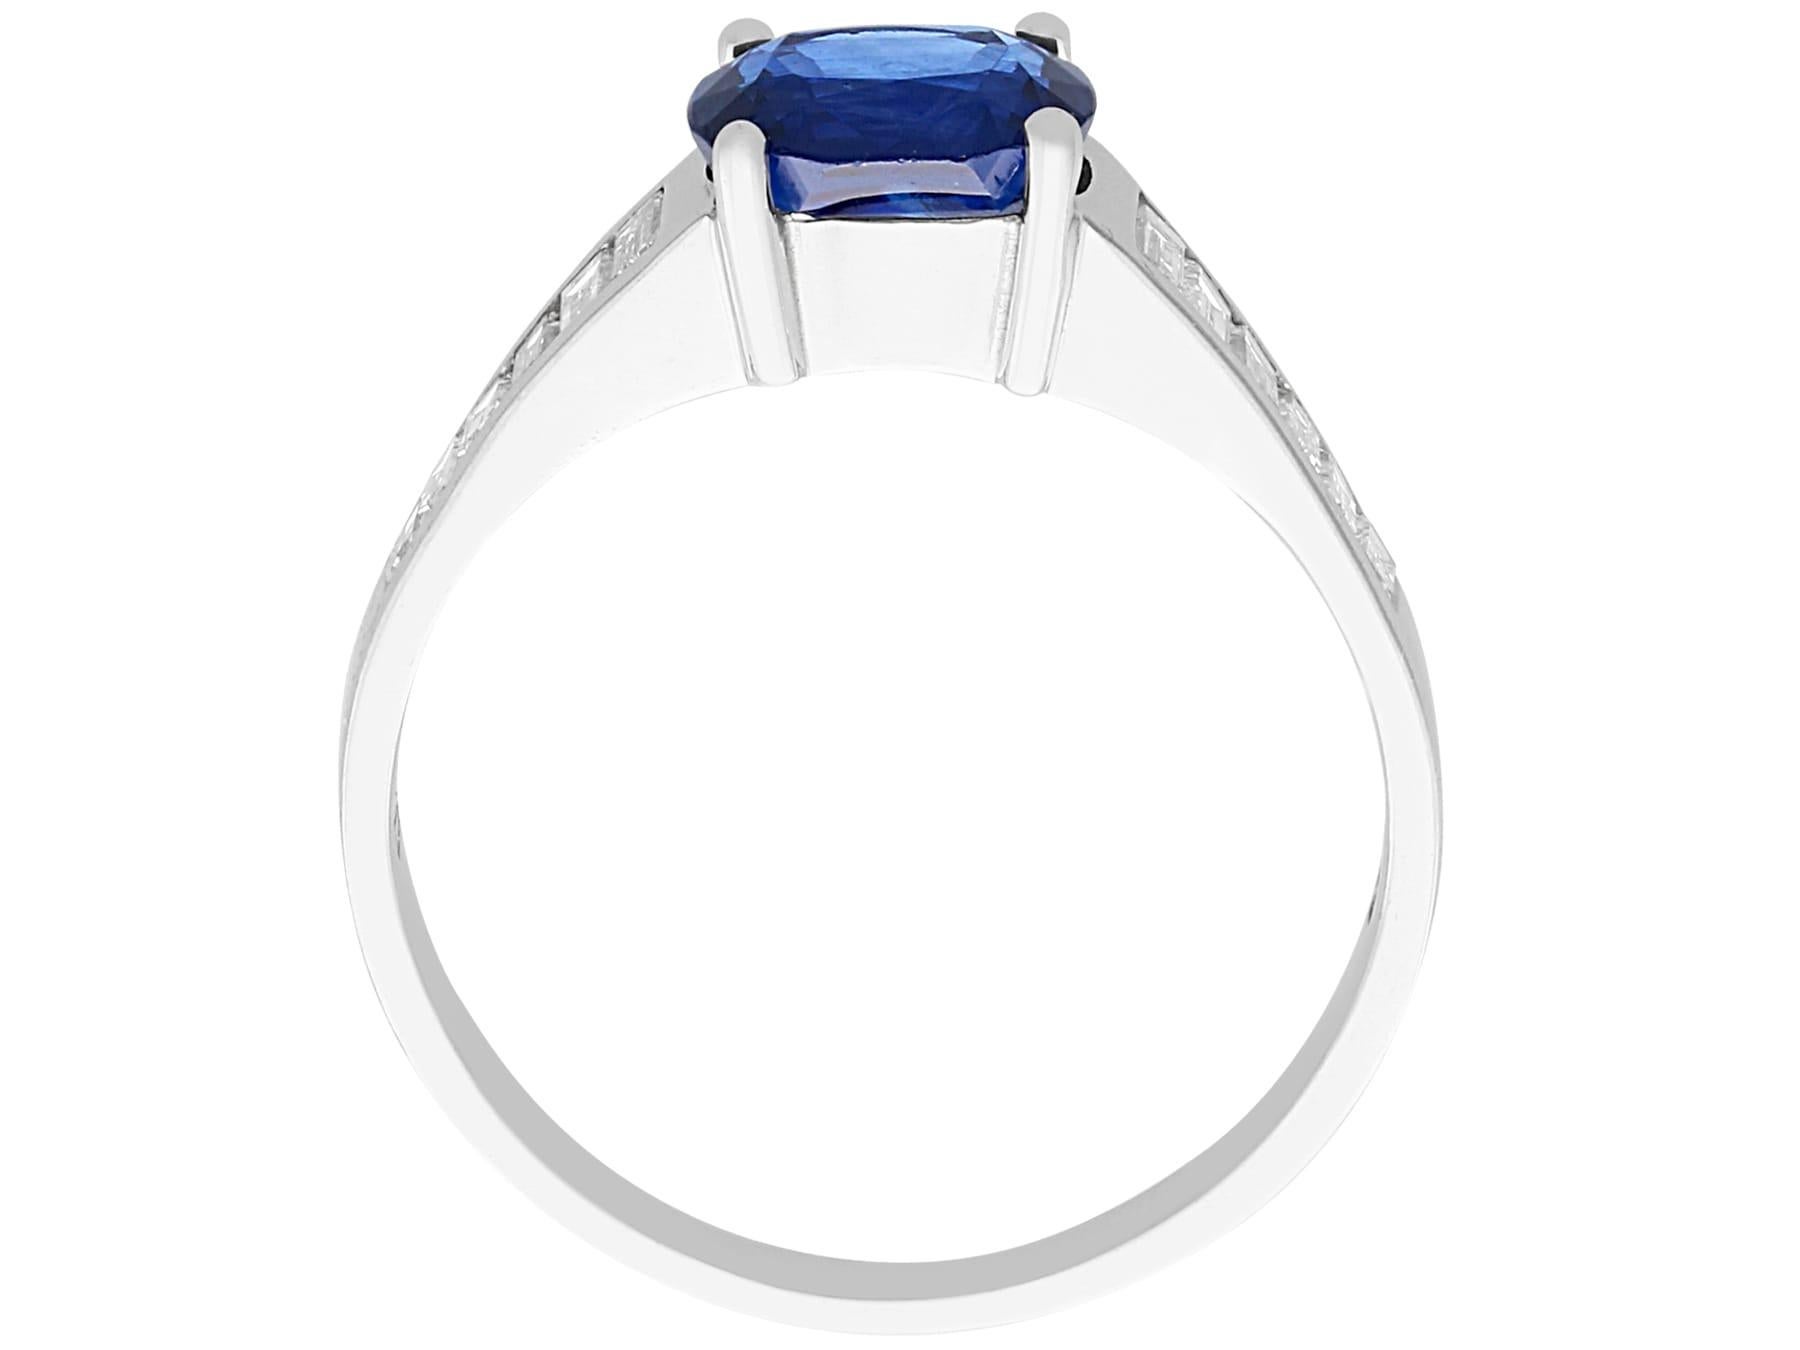 1990s 1.20 Carat Oval Cut Sapphire Diamond White Gold Cocktail Ring For Sale 3